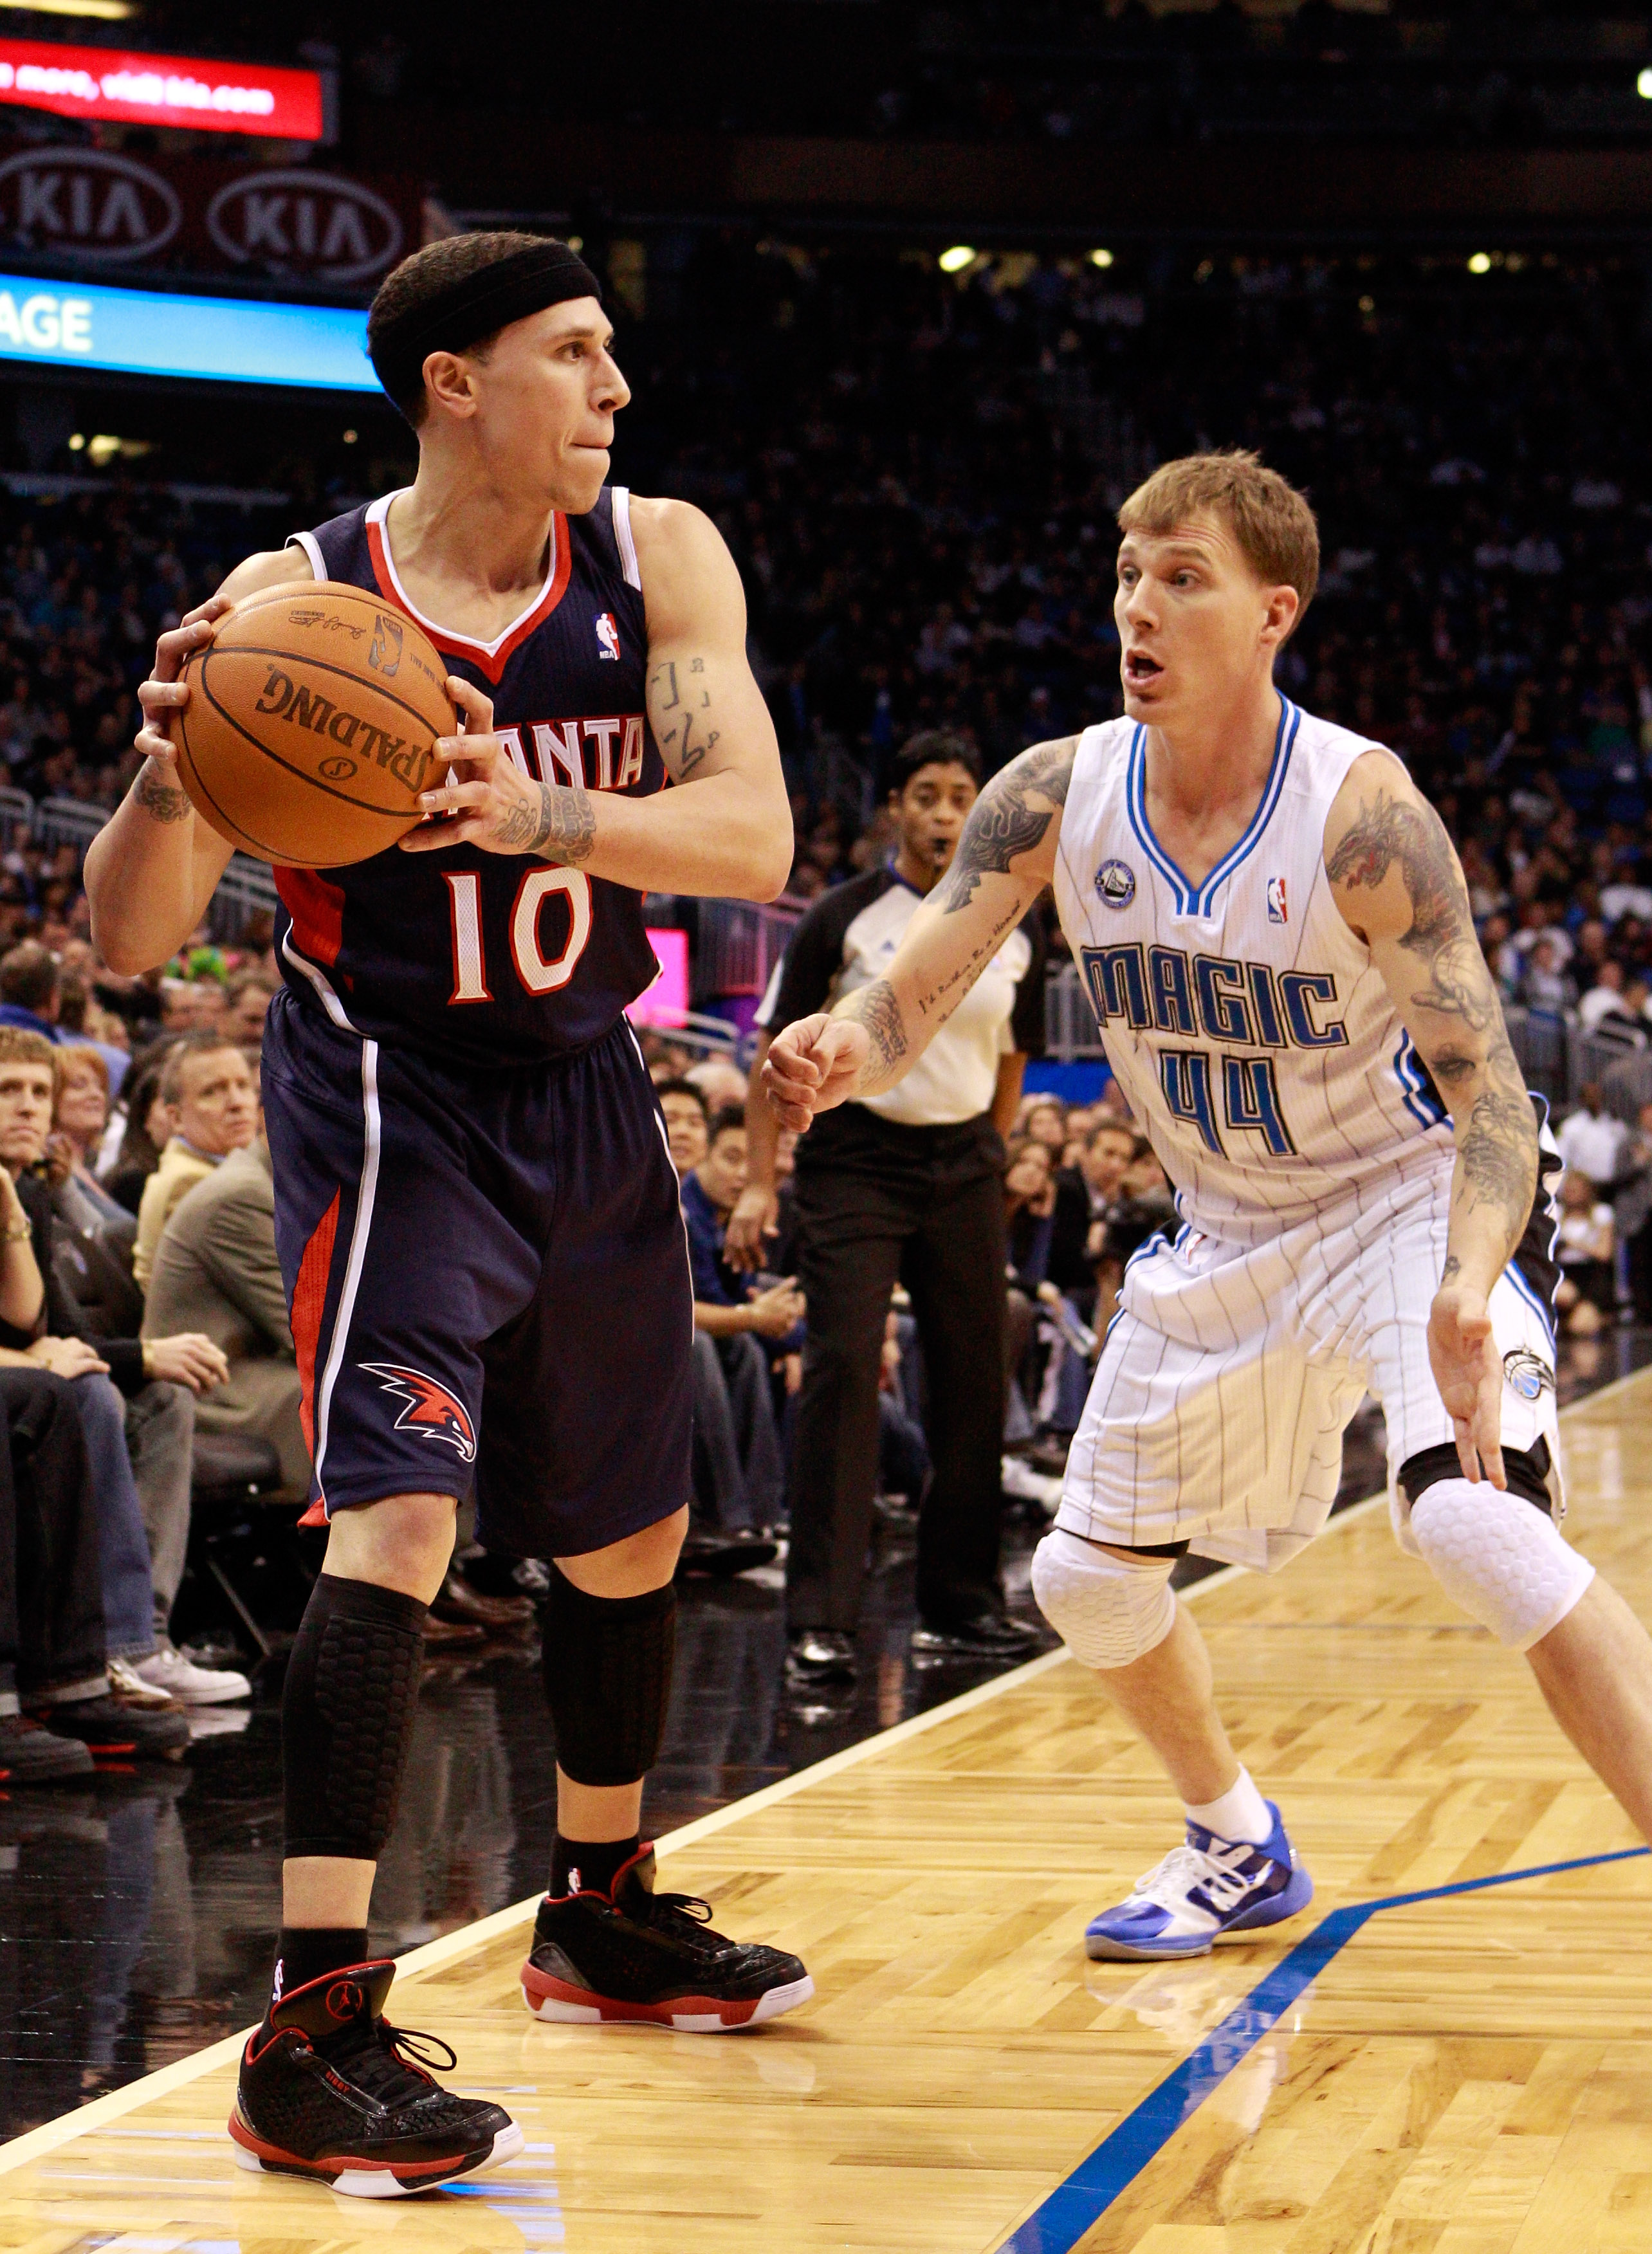 ORLANDO, FL - DECEMBER 06:  Jason Williams #44 of the Orlando Magic guards Mike Bibby #10 of the Atlanta Hawks during the game at Amway Arena on December 6, 2010 in Orlando, Florida. NOTE TO USER: User expressly acknowledges and agrees that, by downloadin